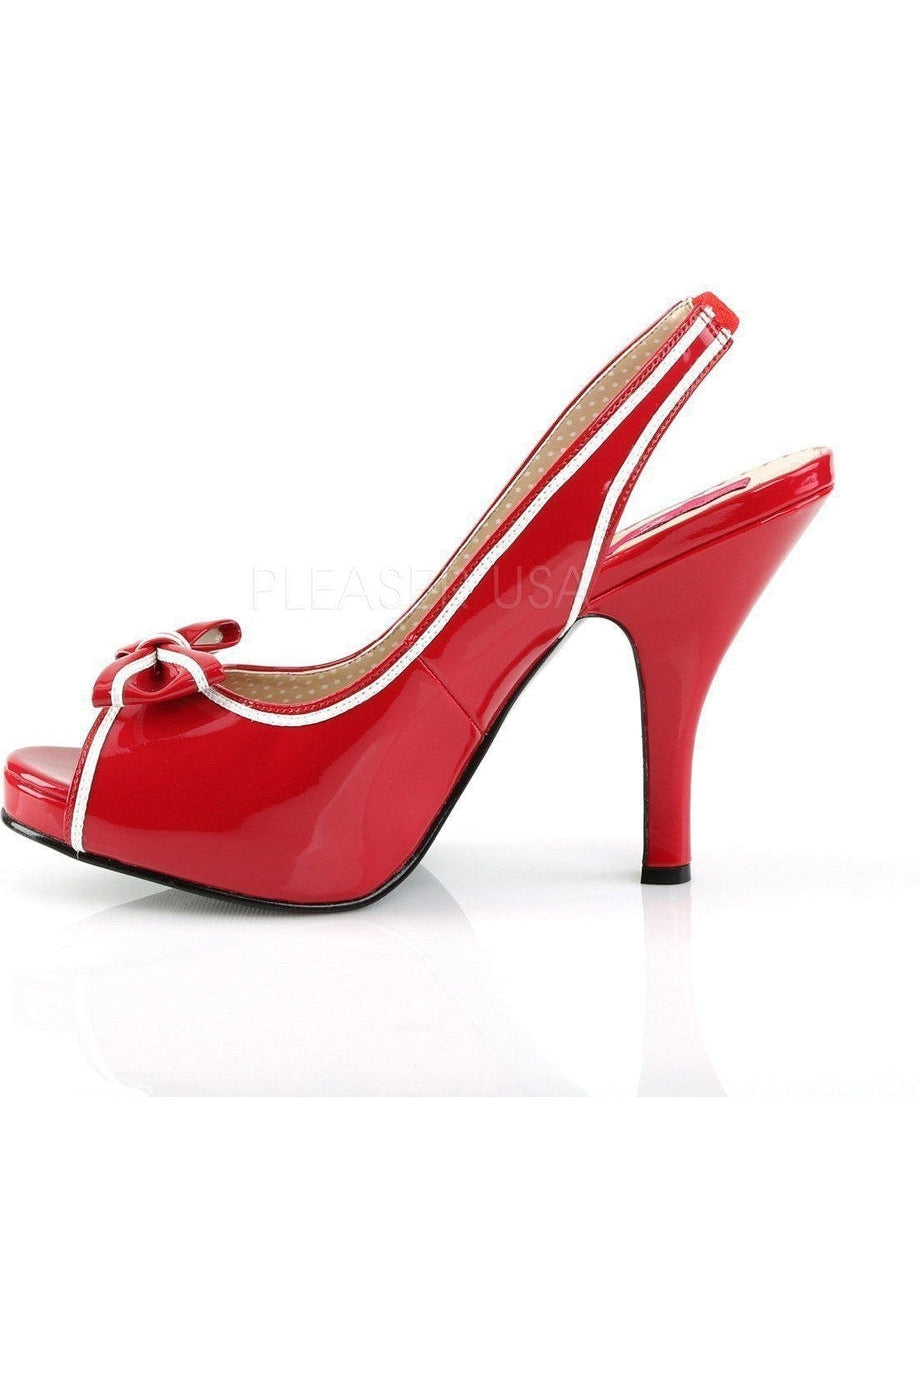 PINUP-10 Sandal | Red Patent-Pleaser Pink Label-Sandals-SEXYSHOES.COM